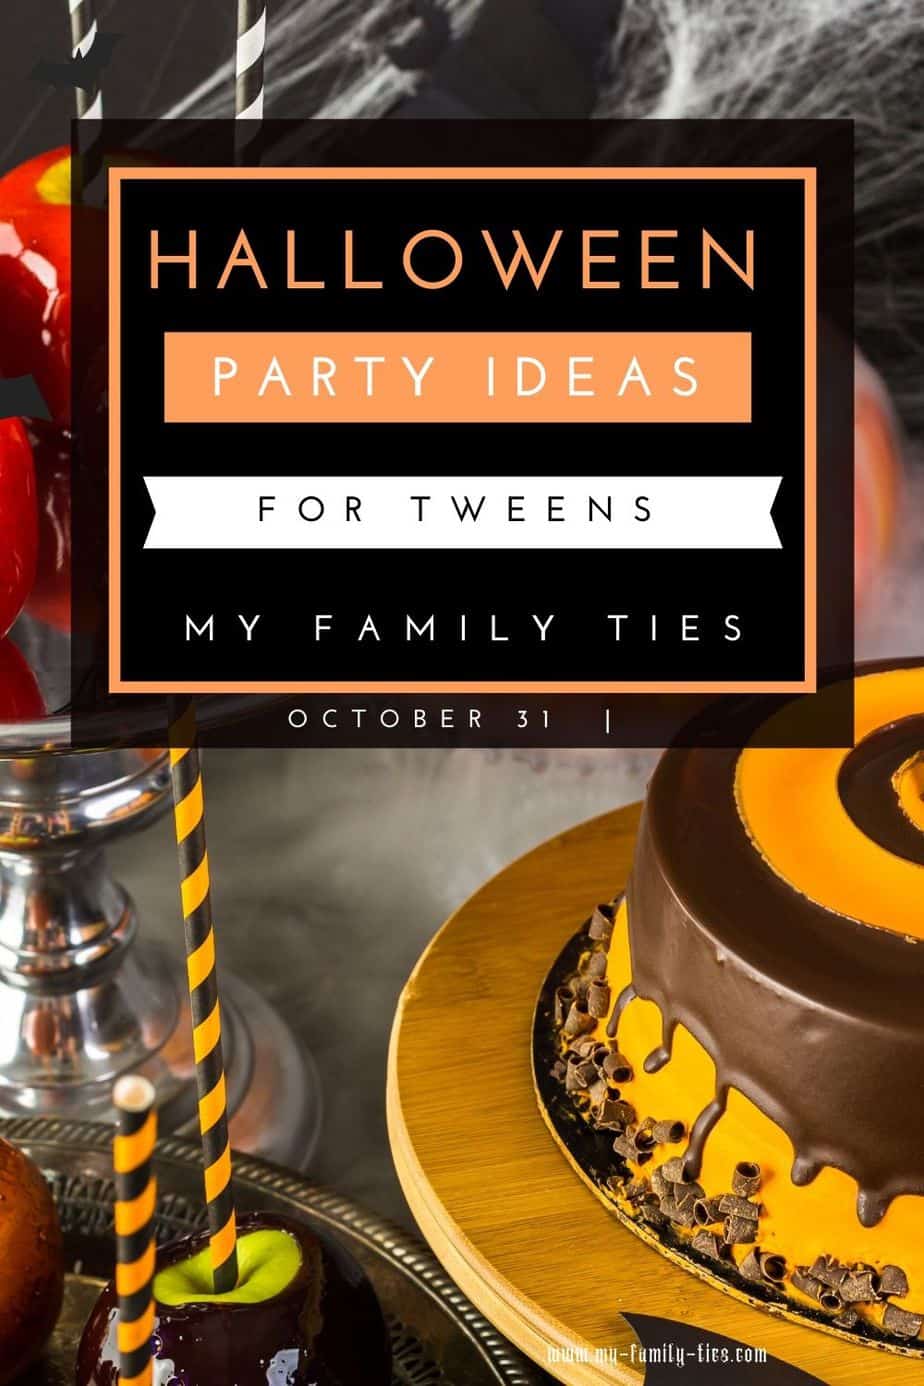 Halloween party ideas for tweens and teens.
Party food for Halloween party black and orange decor
My Family Ties 